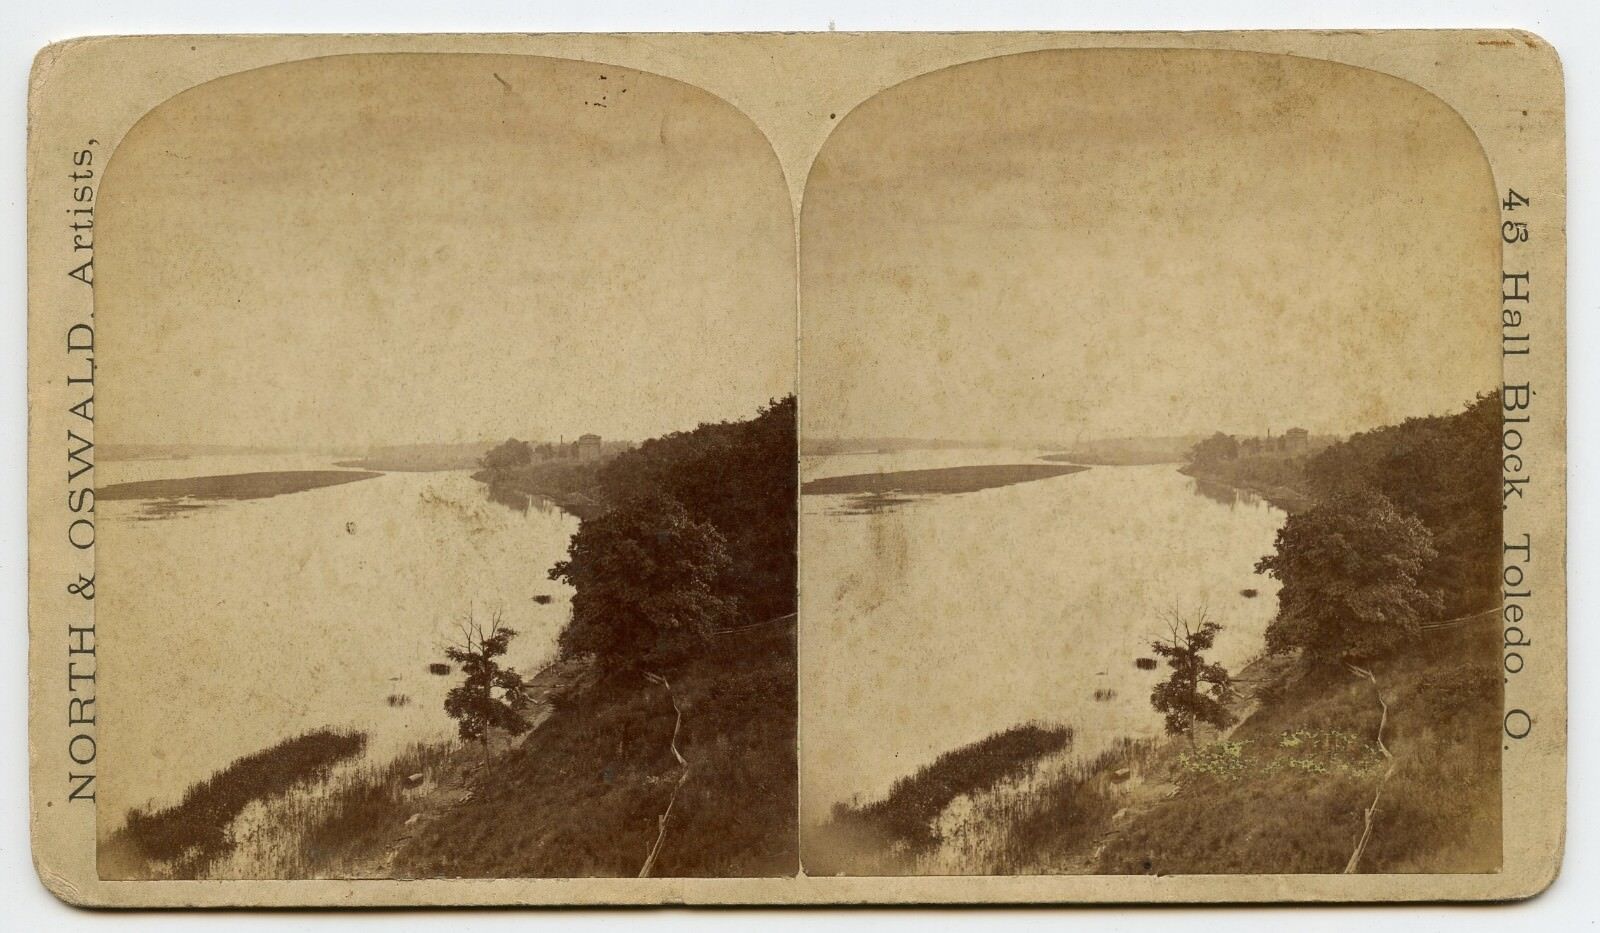  Maumee River near Toledo Ohio Vintage Stereoview Photo by North and Oswald